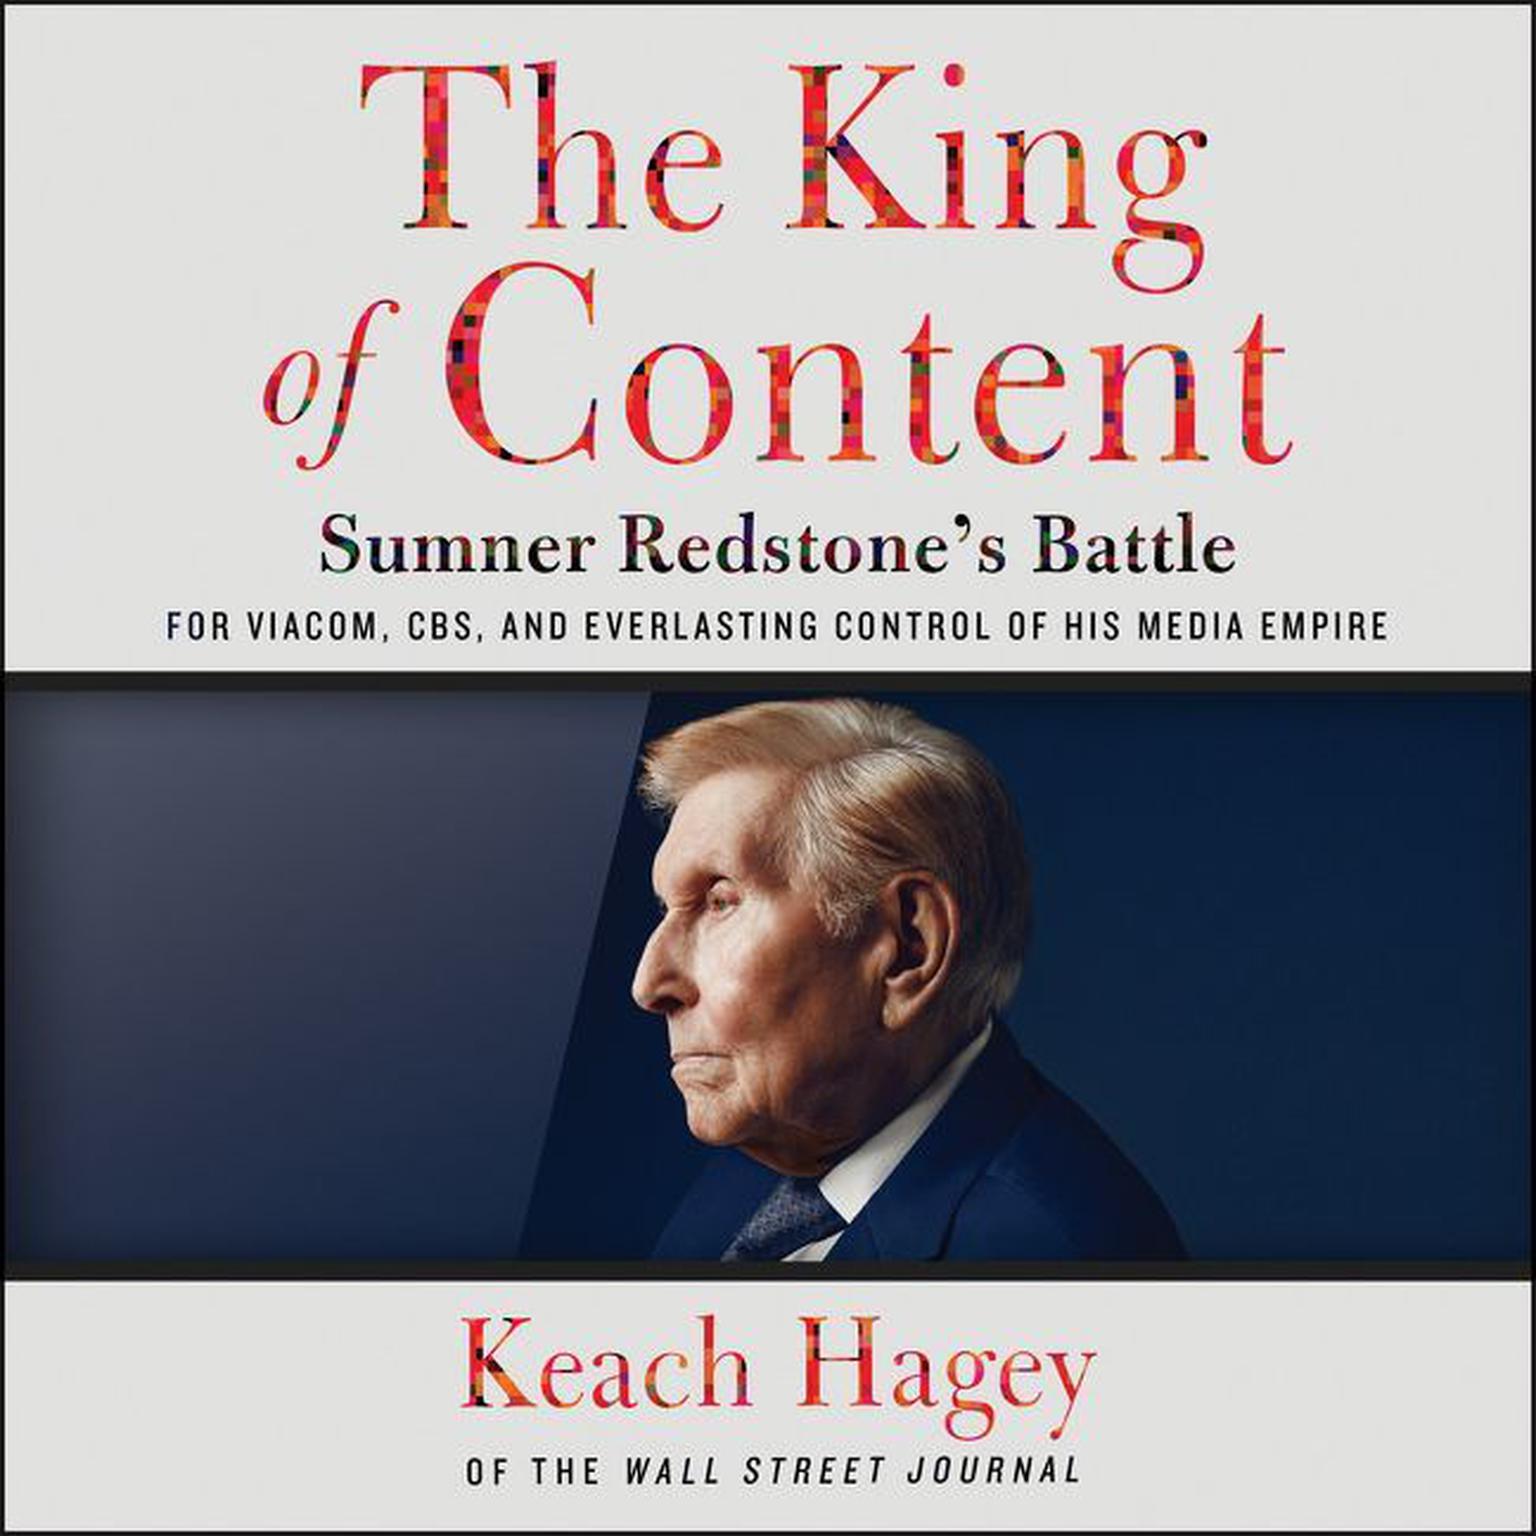 The King of Content: Sumner Redstones Battle for Viacom, CBS, and Everlasting Control of His Media Empire Audiobook, by Keach Hagey